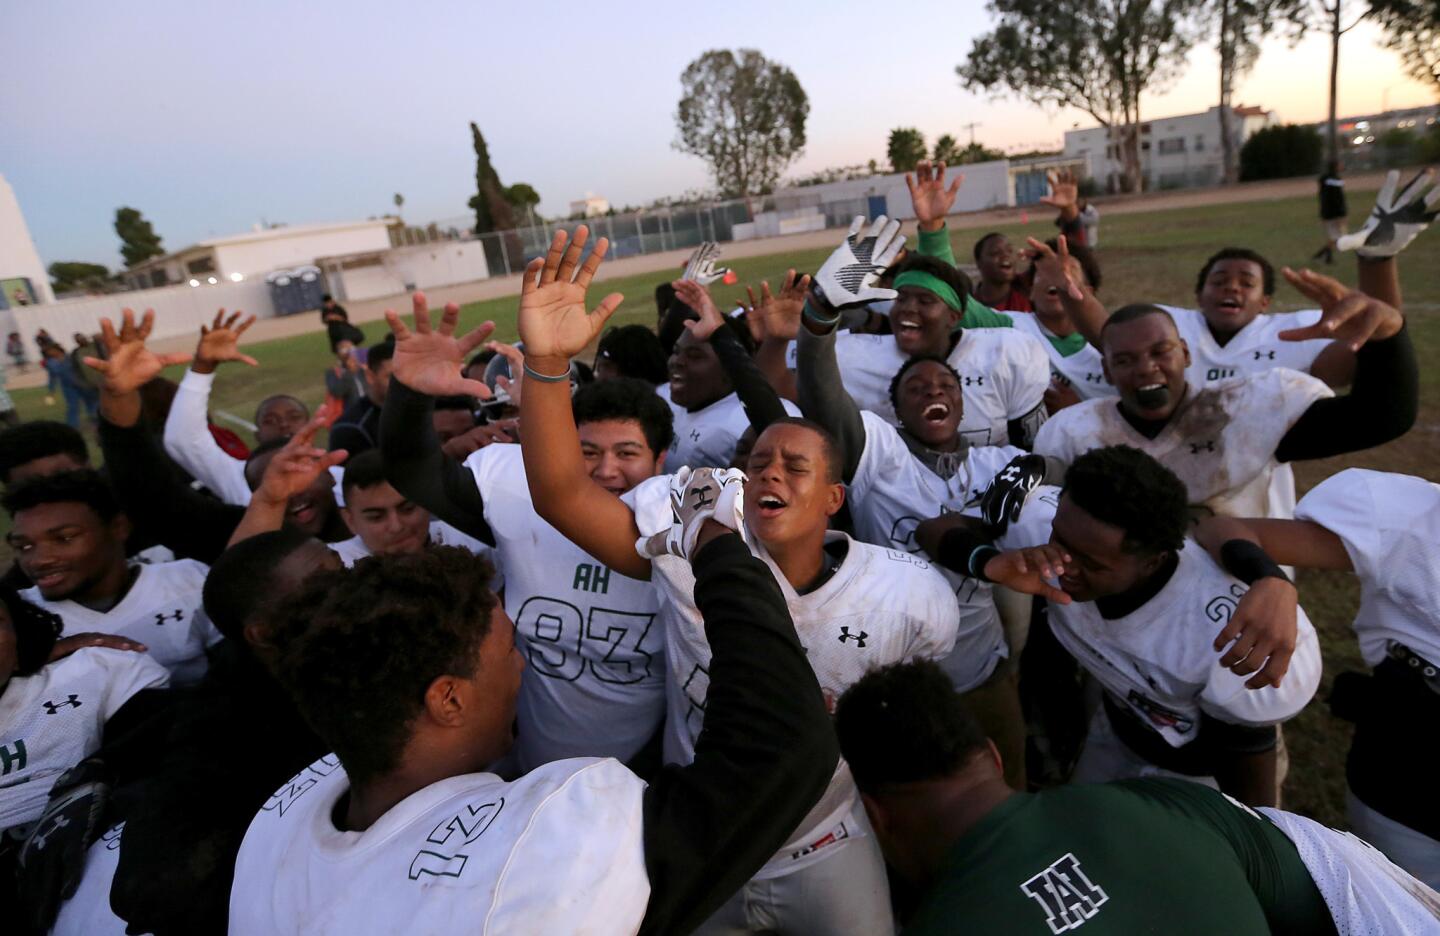 Hawkins High players celebrate after coming from behind to secure a 31-31 tie at Los Angeles High on Friday.